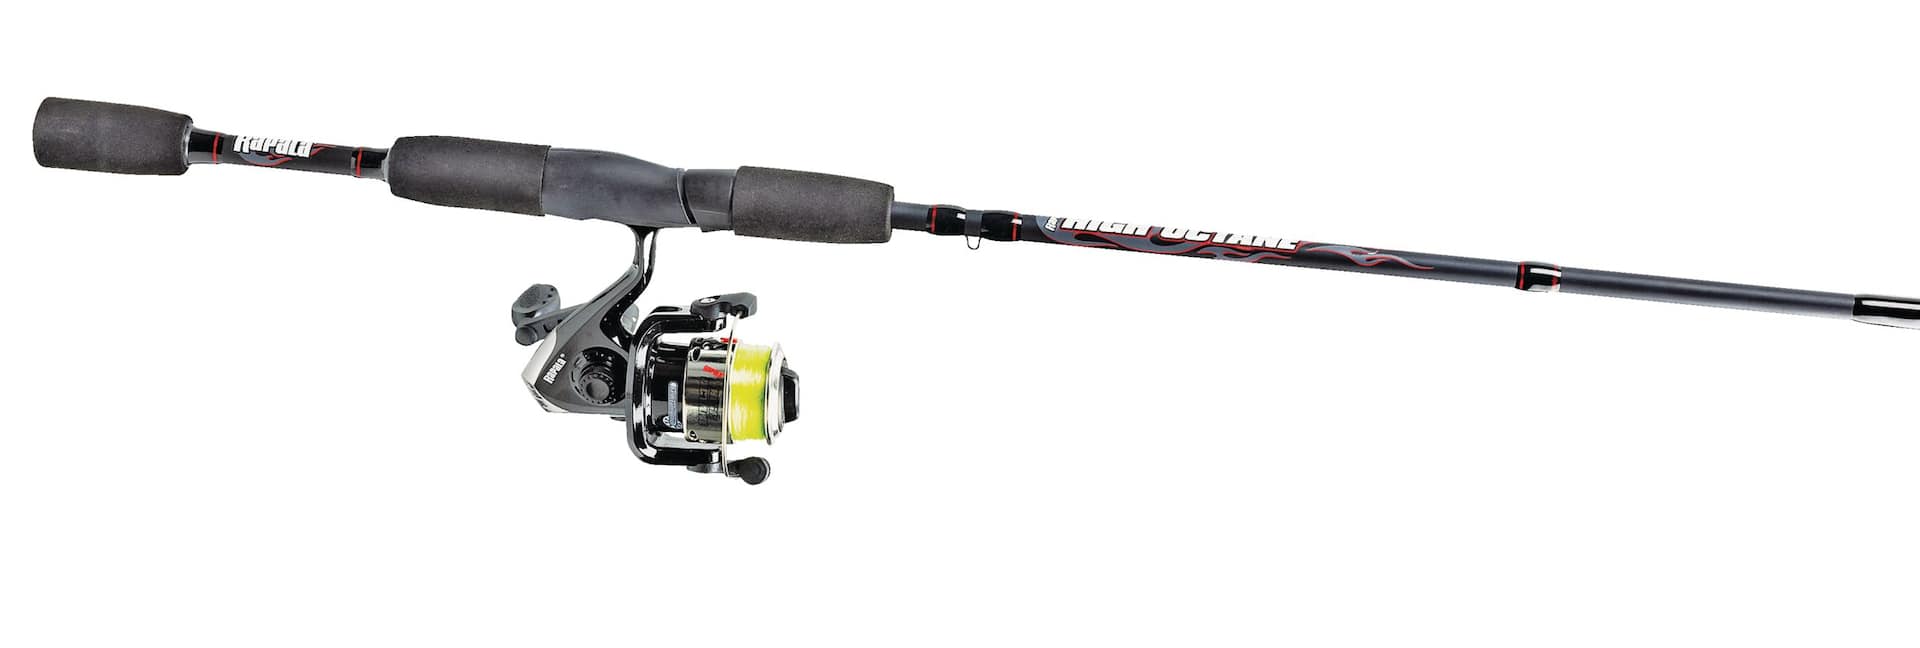 Premium Fly Fishing Rod & Reel Combo - Best Performance and Value